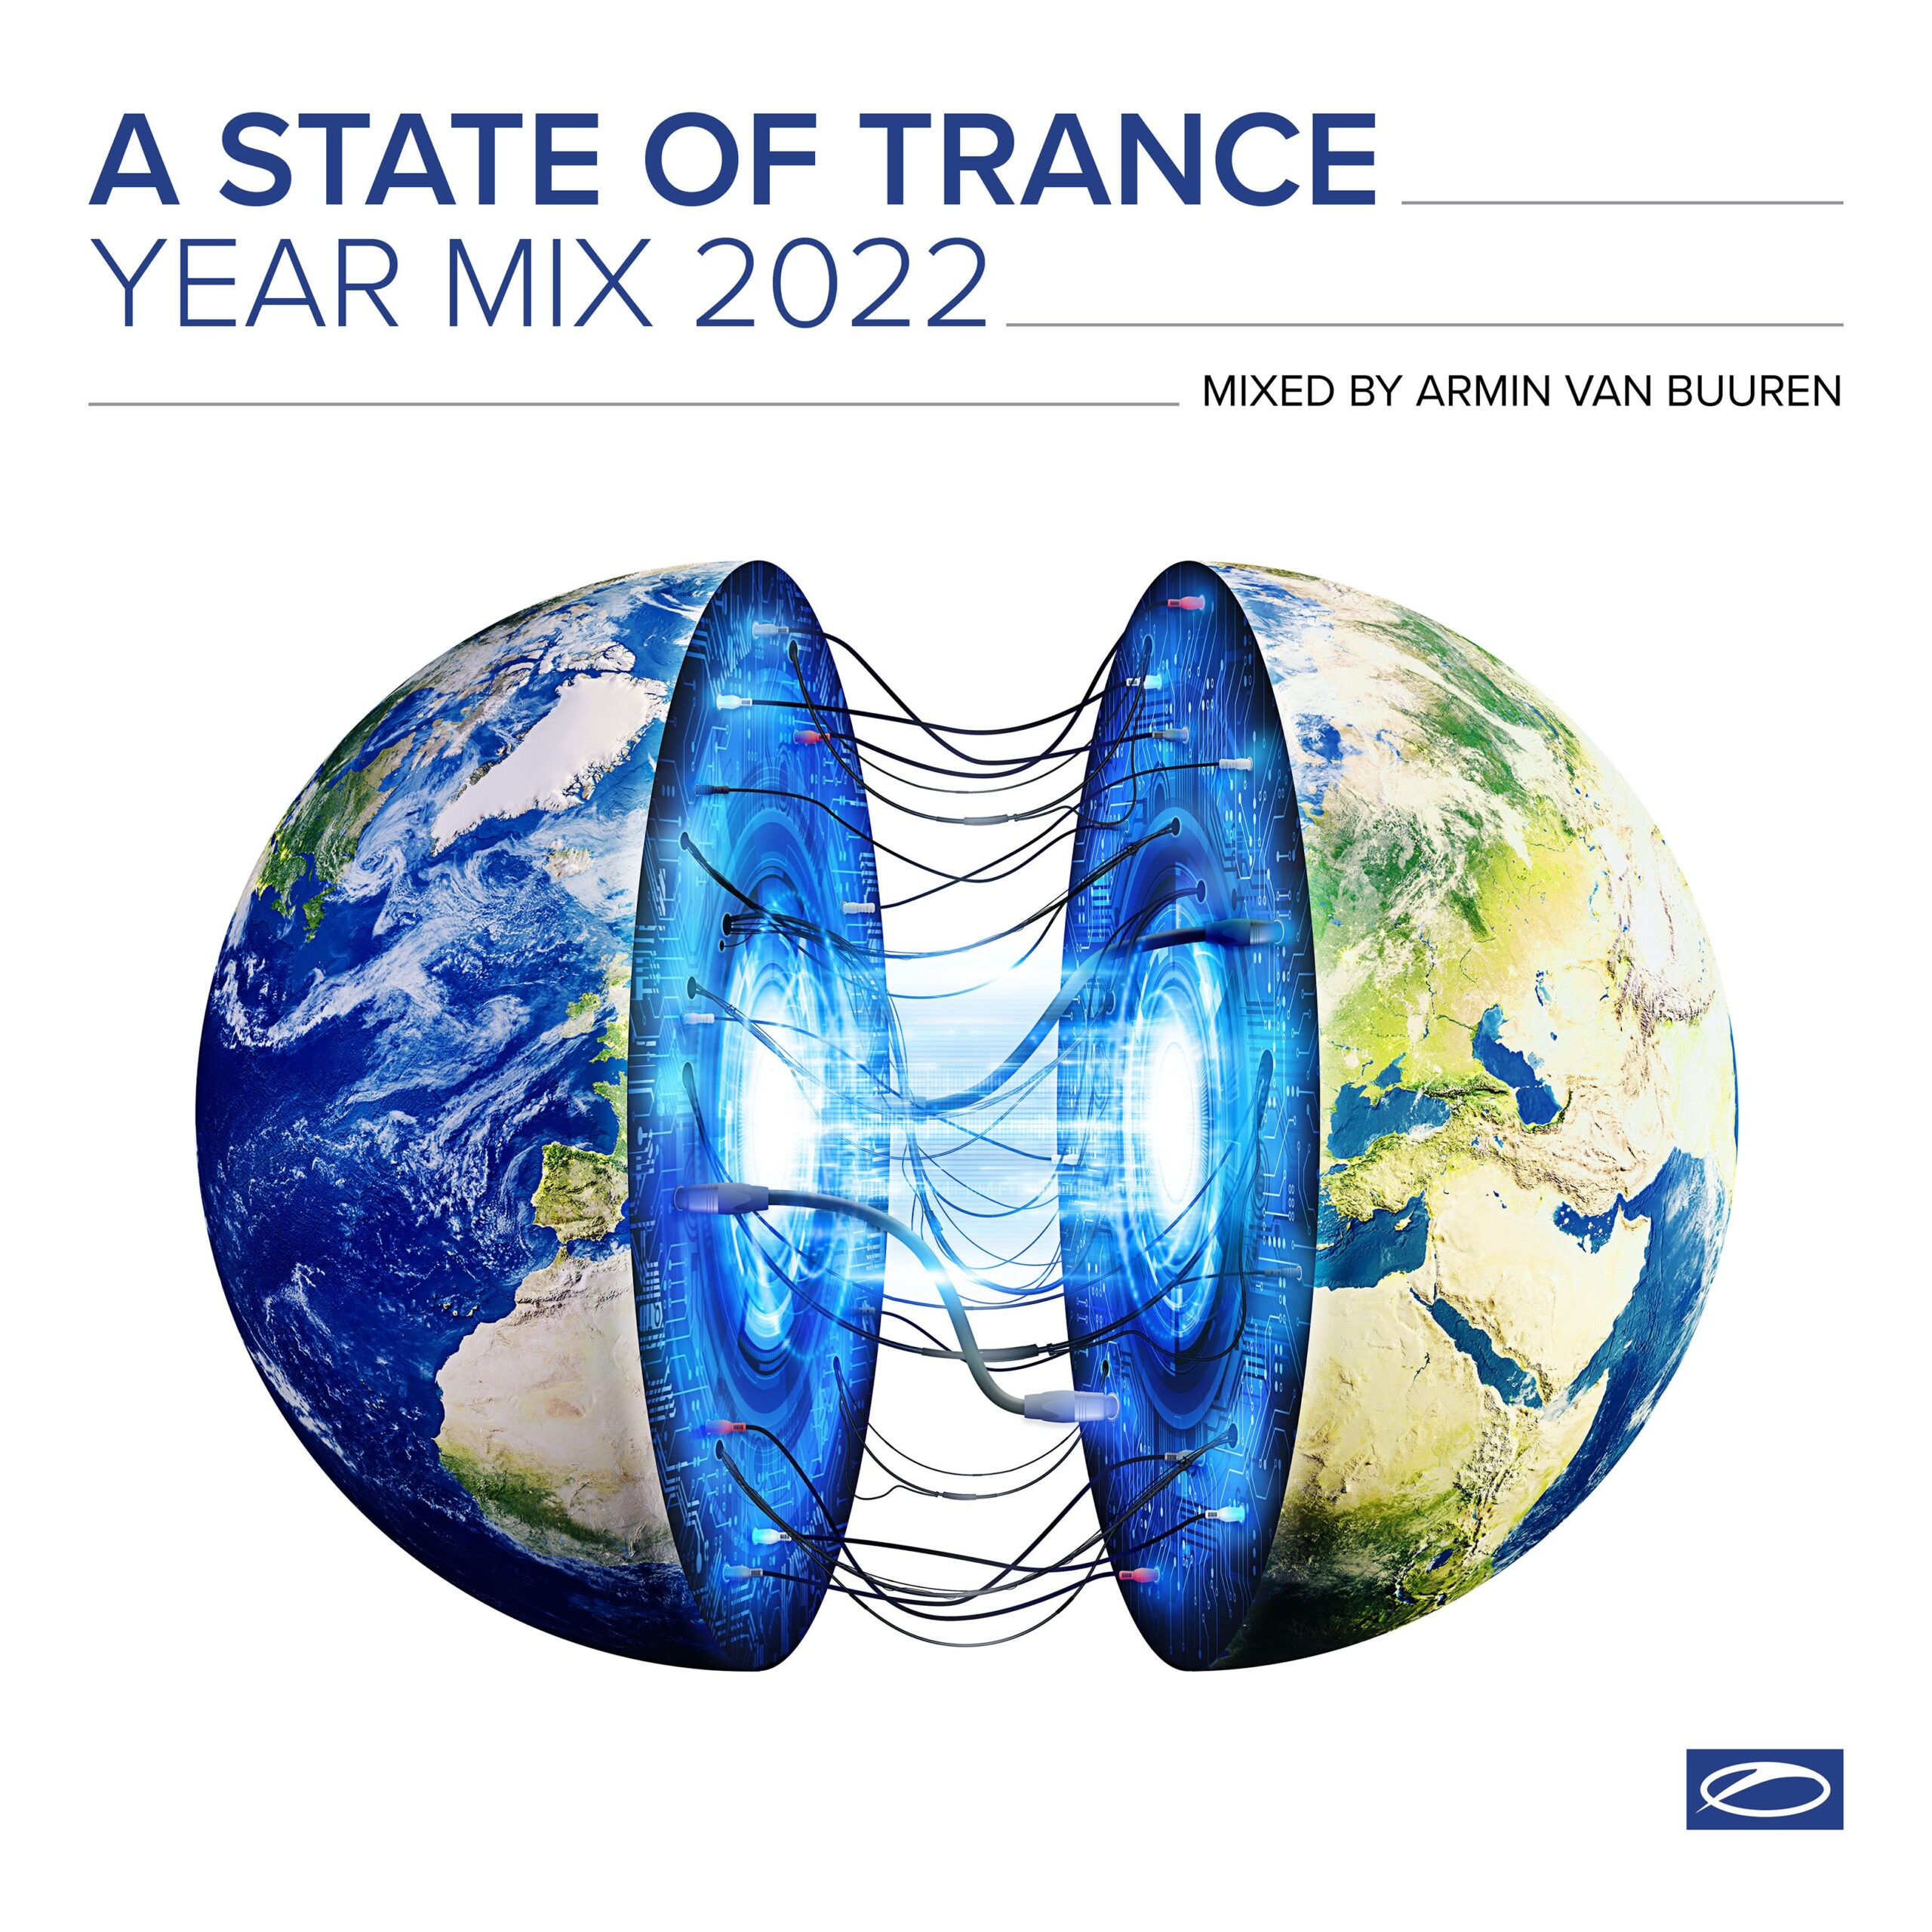 Various Artists presents A State of Trance Year Mix 2022 mixed by Armin van Buuren on Armada Music